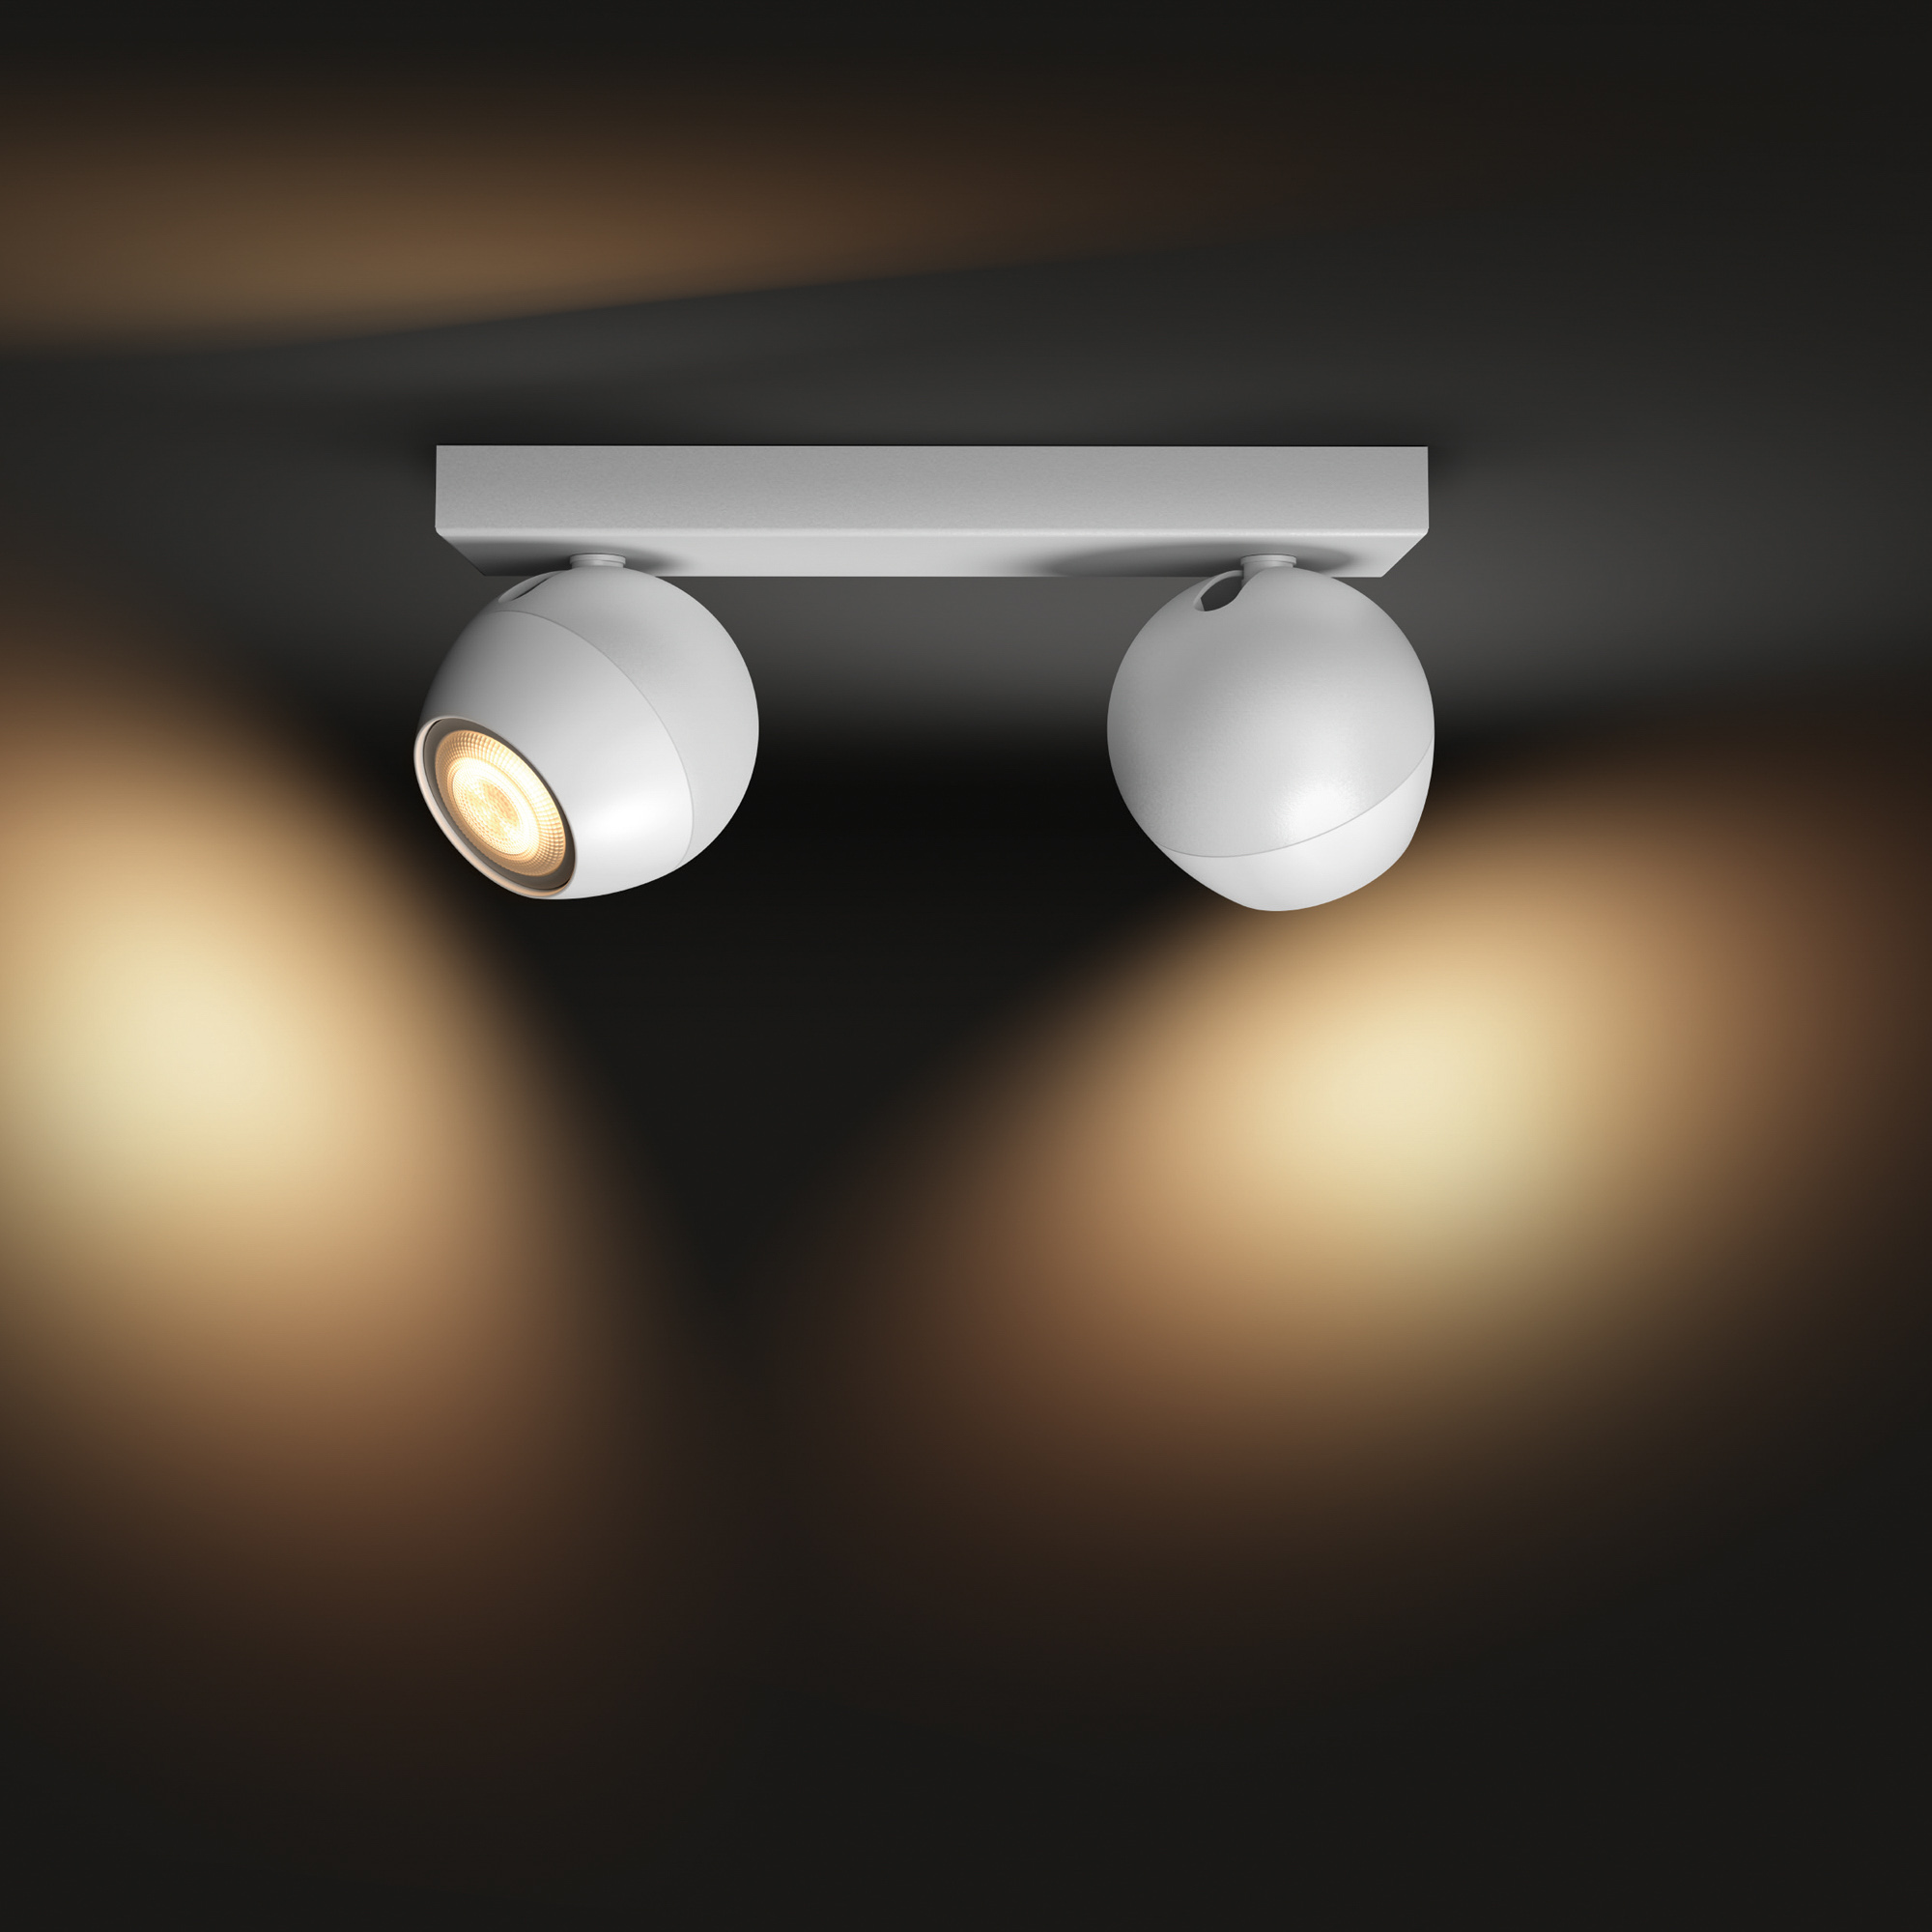 Philips Hue White Ambiance Buckram LED Spotlight double-flamed white 2x 350lm incl. Dimmer Switch